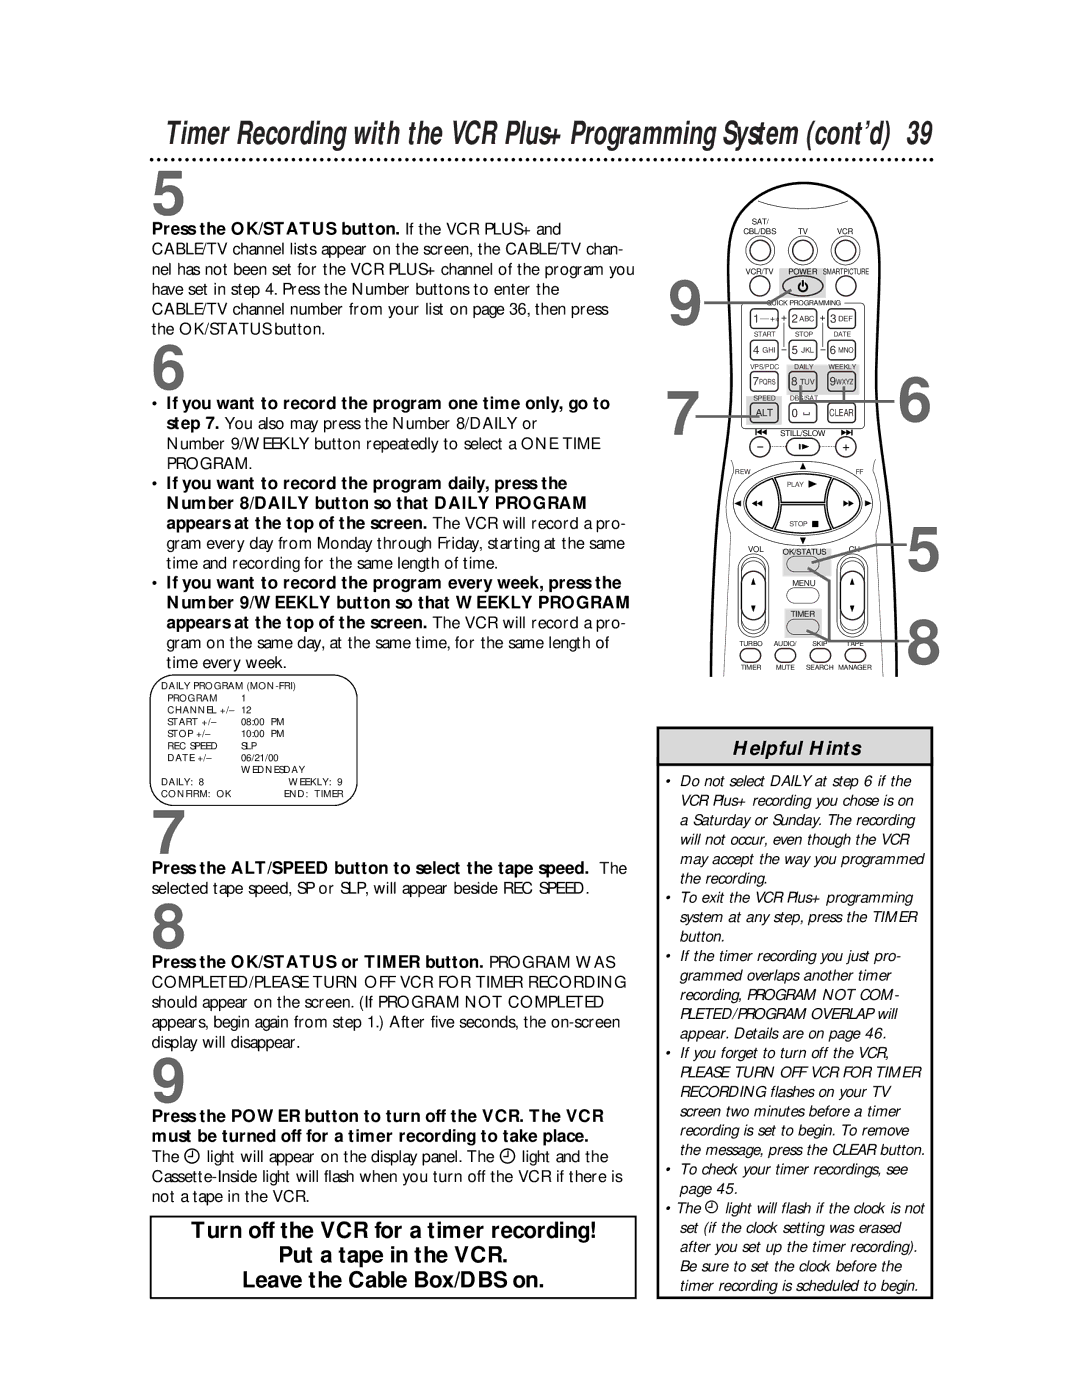 Philips VR810BPH owner manual If you forget to turn off the VCR, To check your timer recordings, see 